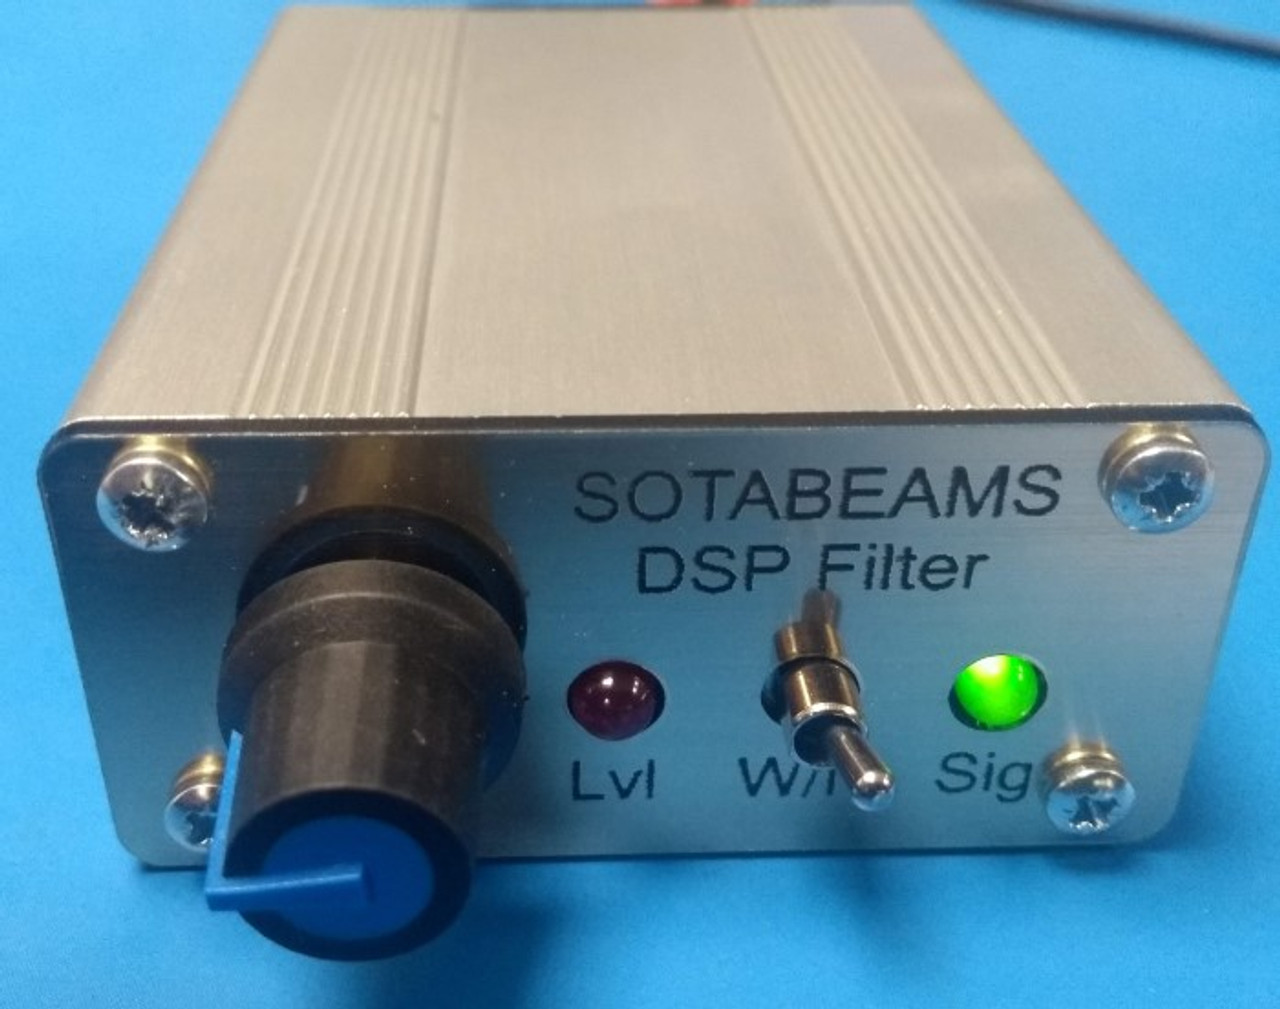 Buy DSP Audio Filter Units - Sotabeams DSP Filter Online | Audio filters  and more | Amateur Radio Accessories and Equipment